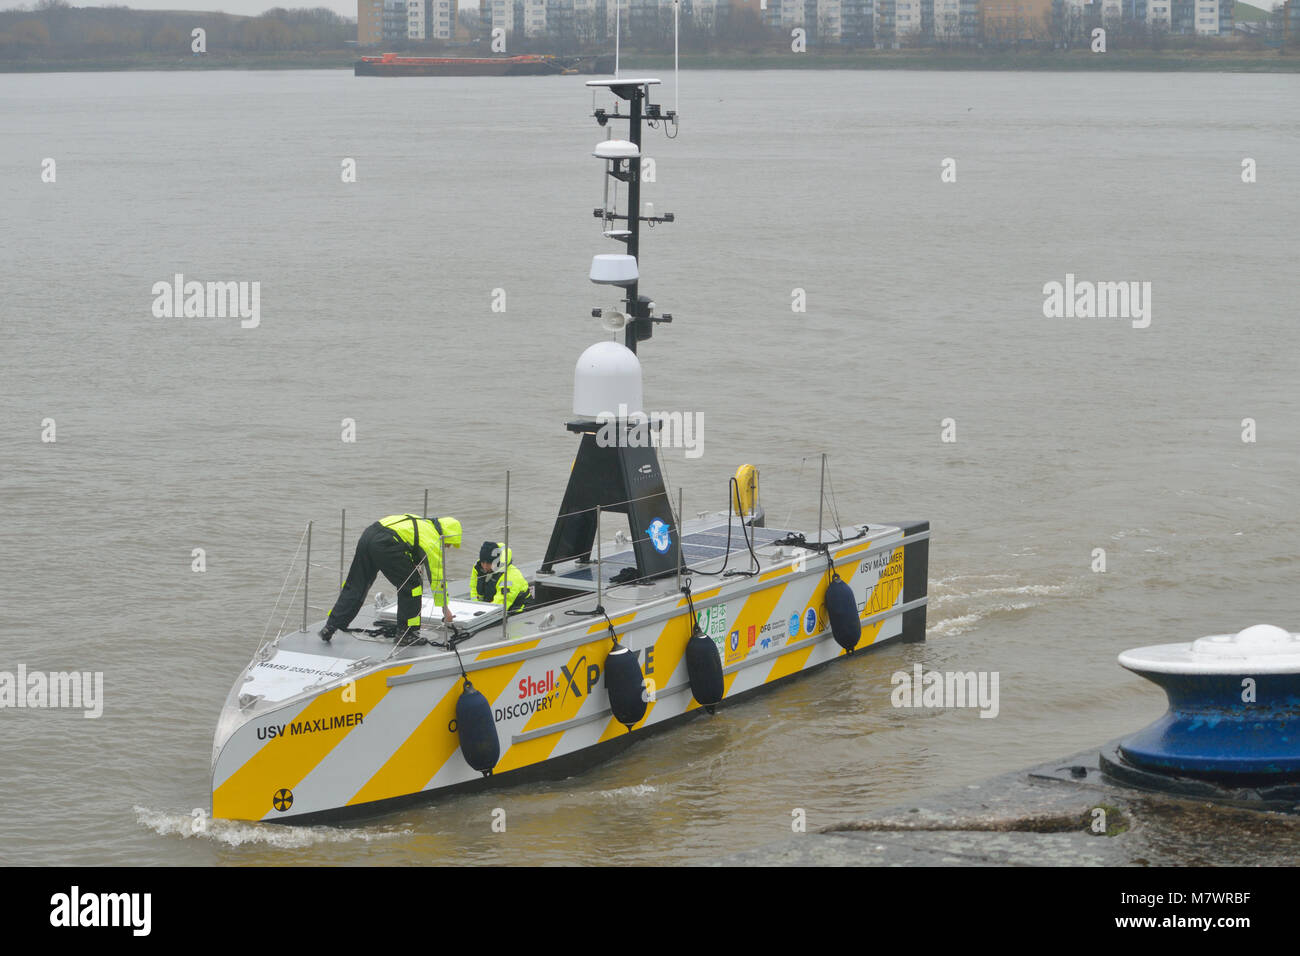 USV Maxlimer is a long-endurance Unmanned Surface Vessel and is one of the shortlisted contenders for the Shell Ocean Discovery XPRIZE Stock Photo